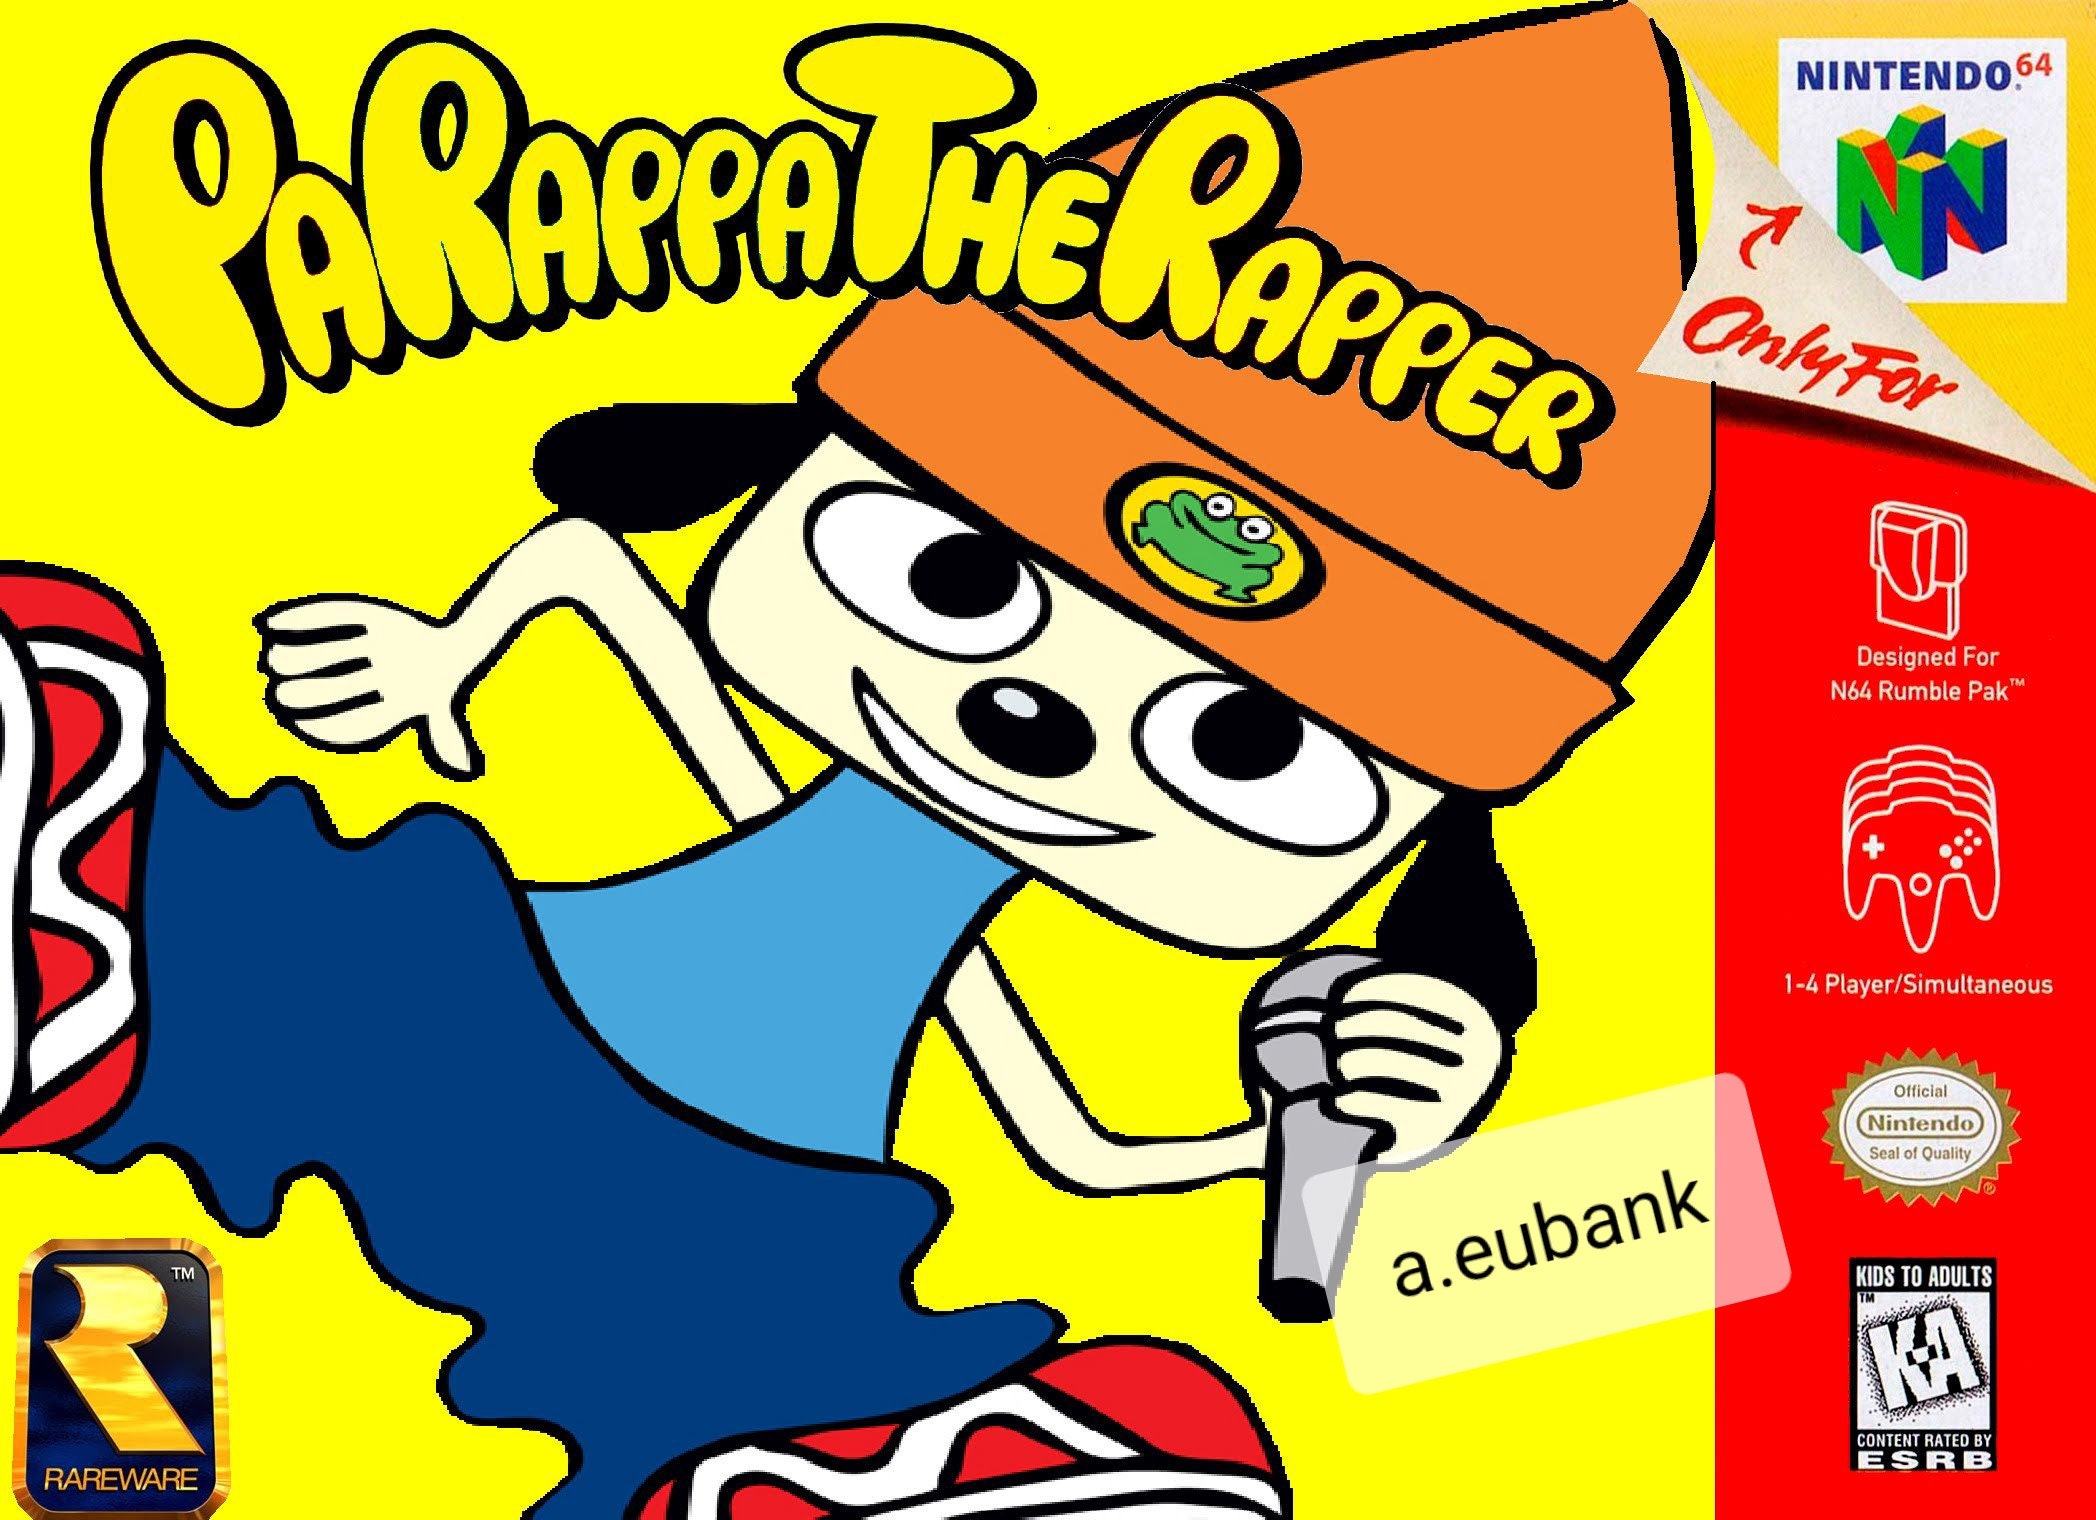 parappa-the-rapper-n64-game-cover-art-printable-download-etsy